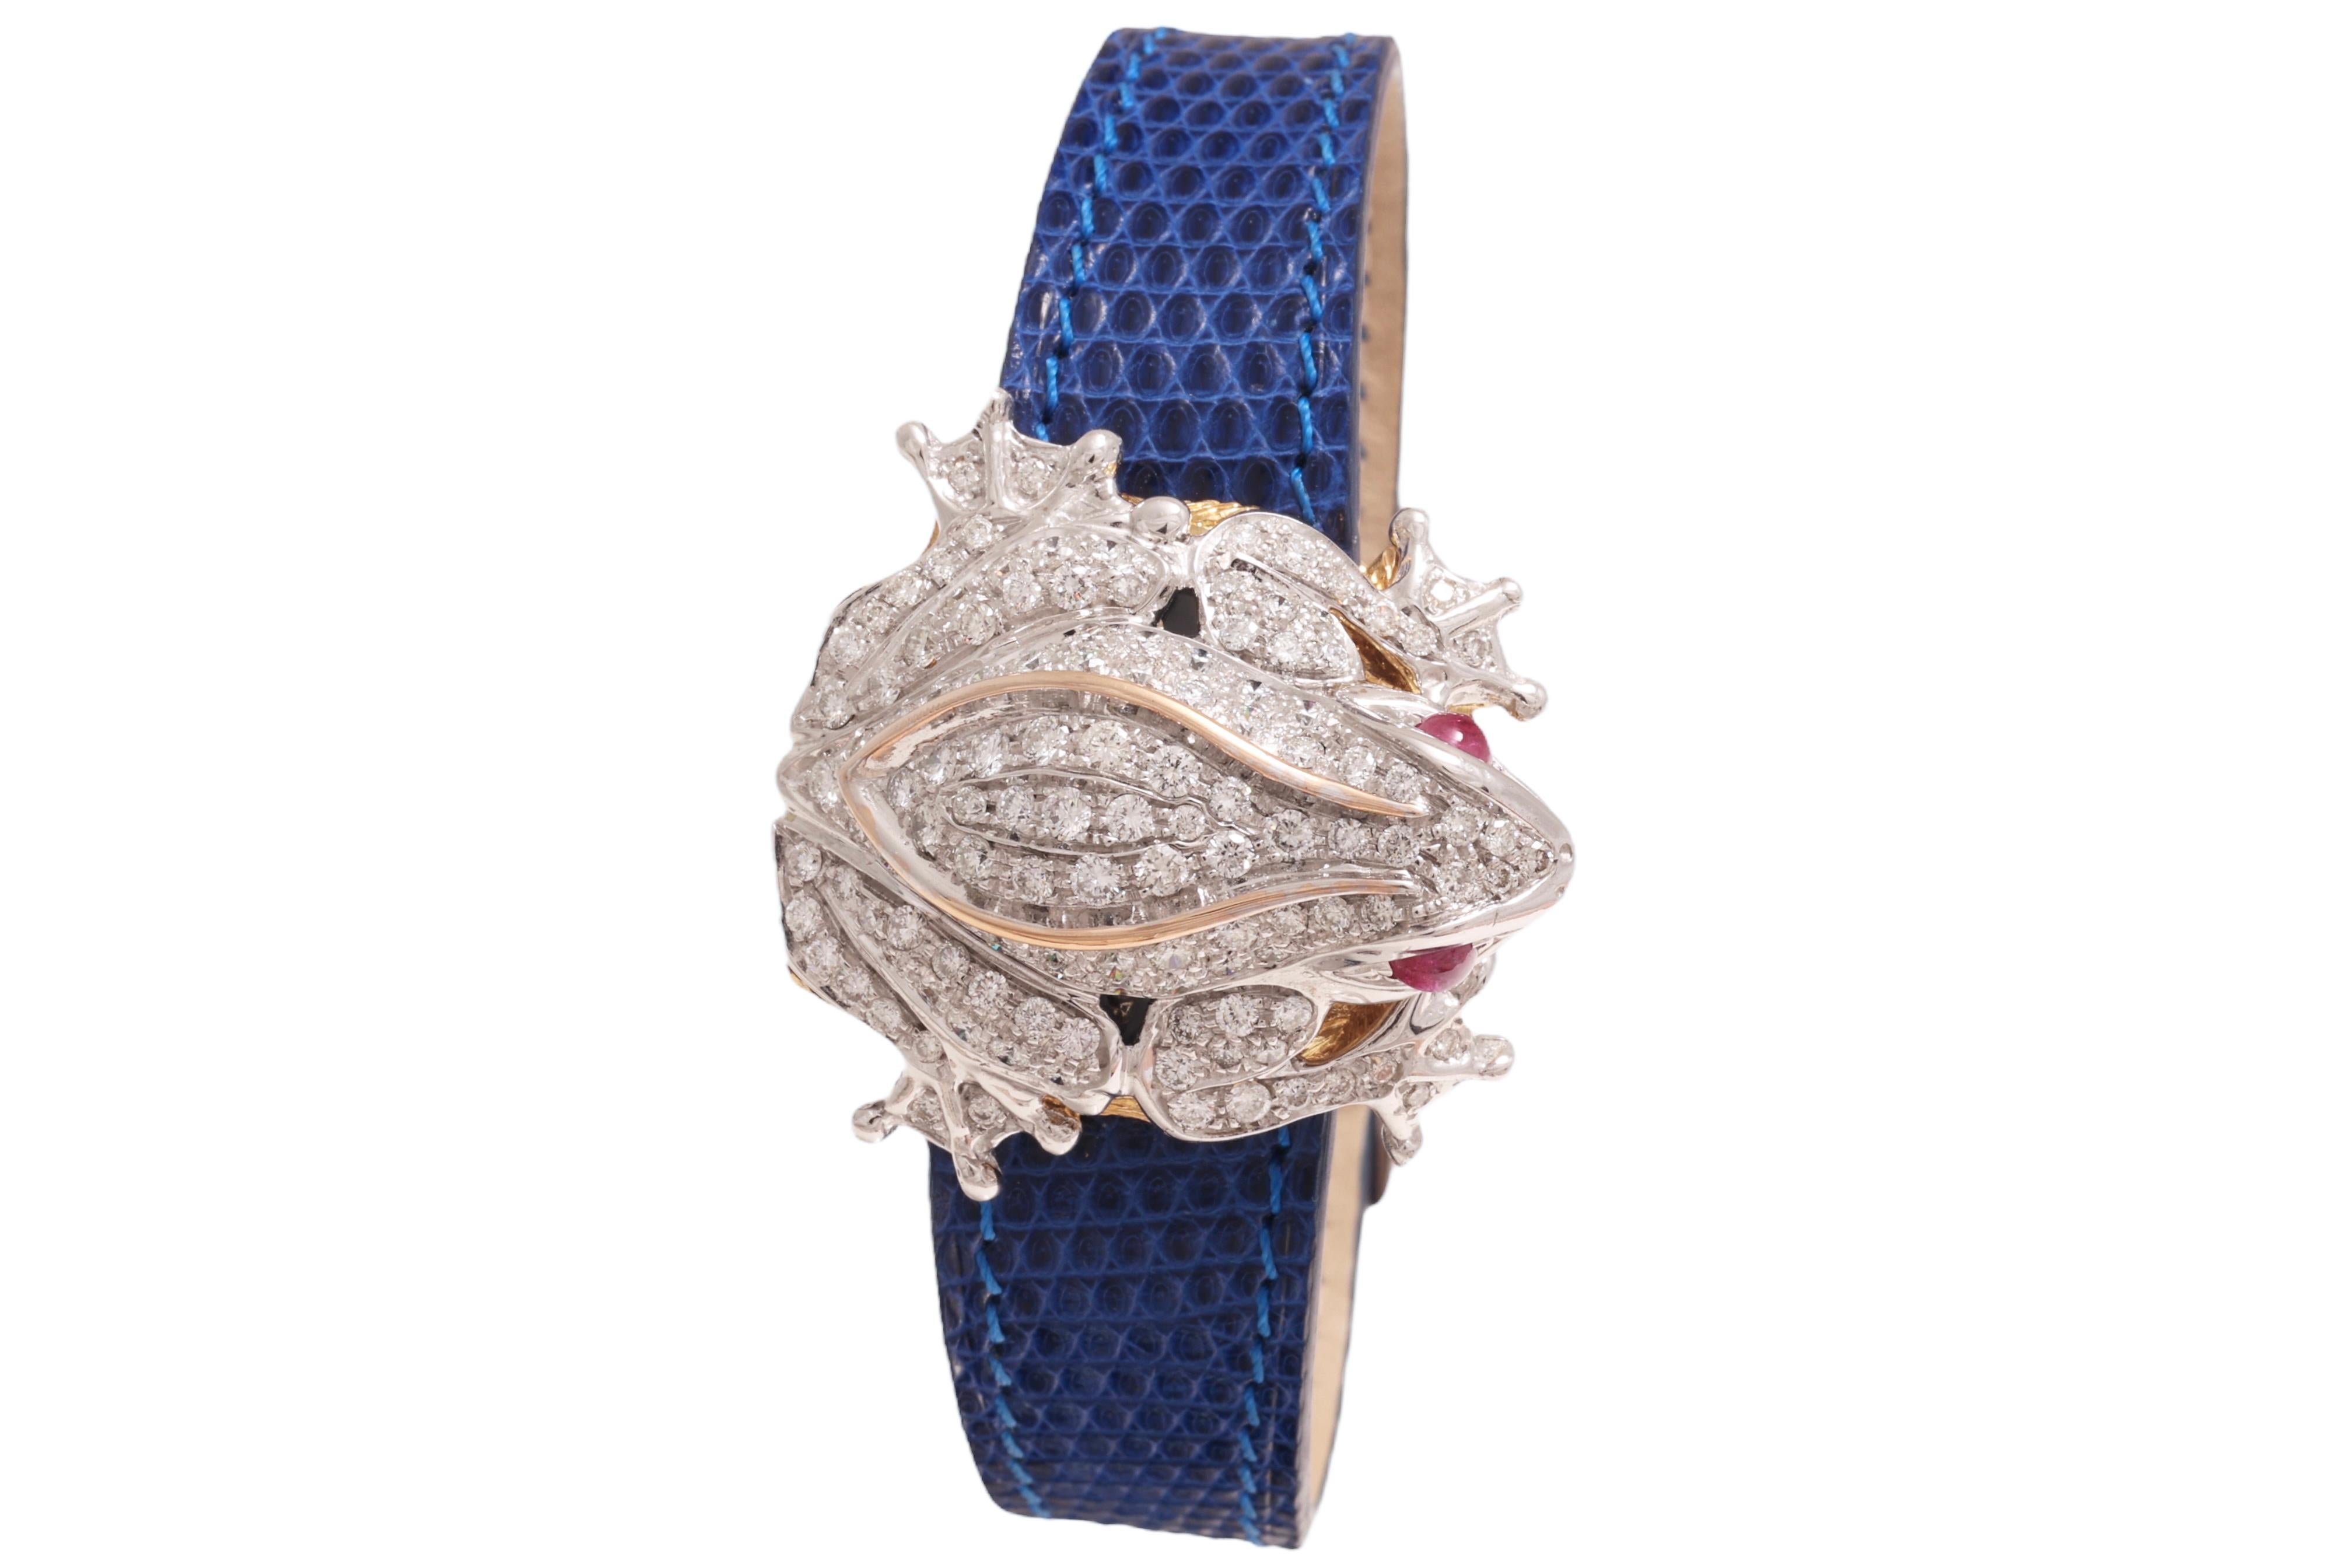 Amazing Zanetti ,Rana Scrigio Diamond watch with ruby cabuchons in eyes. 

For special occasions as it s so exceptional.

Case : 18kt solid gold

Dial : natural stone

Comes with 3 leather straps 

